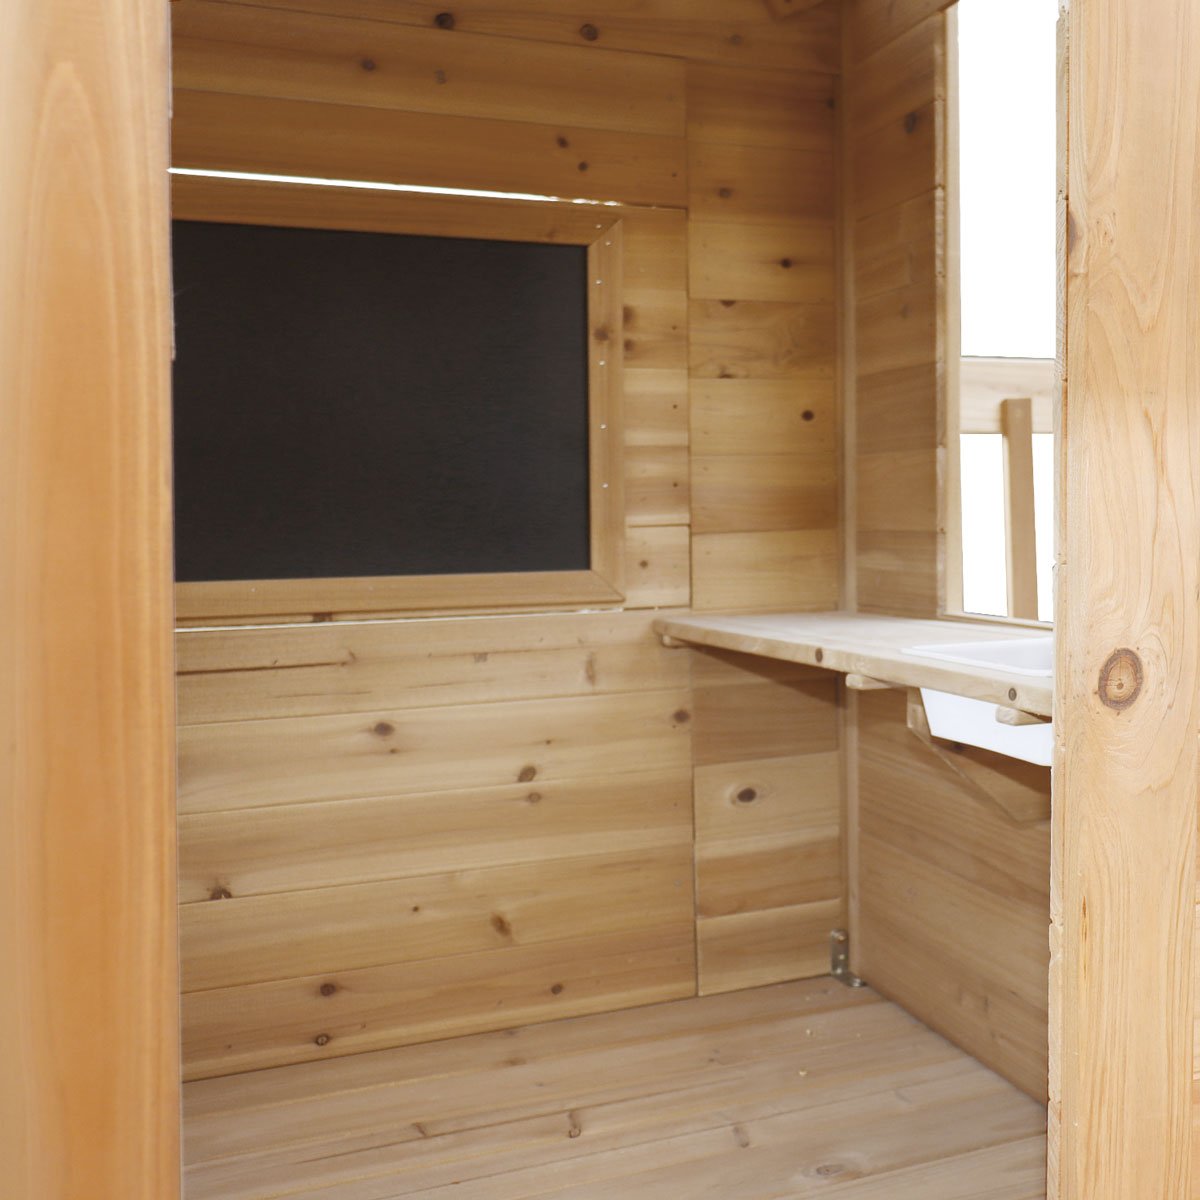 Silverton Cubby House with blackboard - Your Kids Happy Place